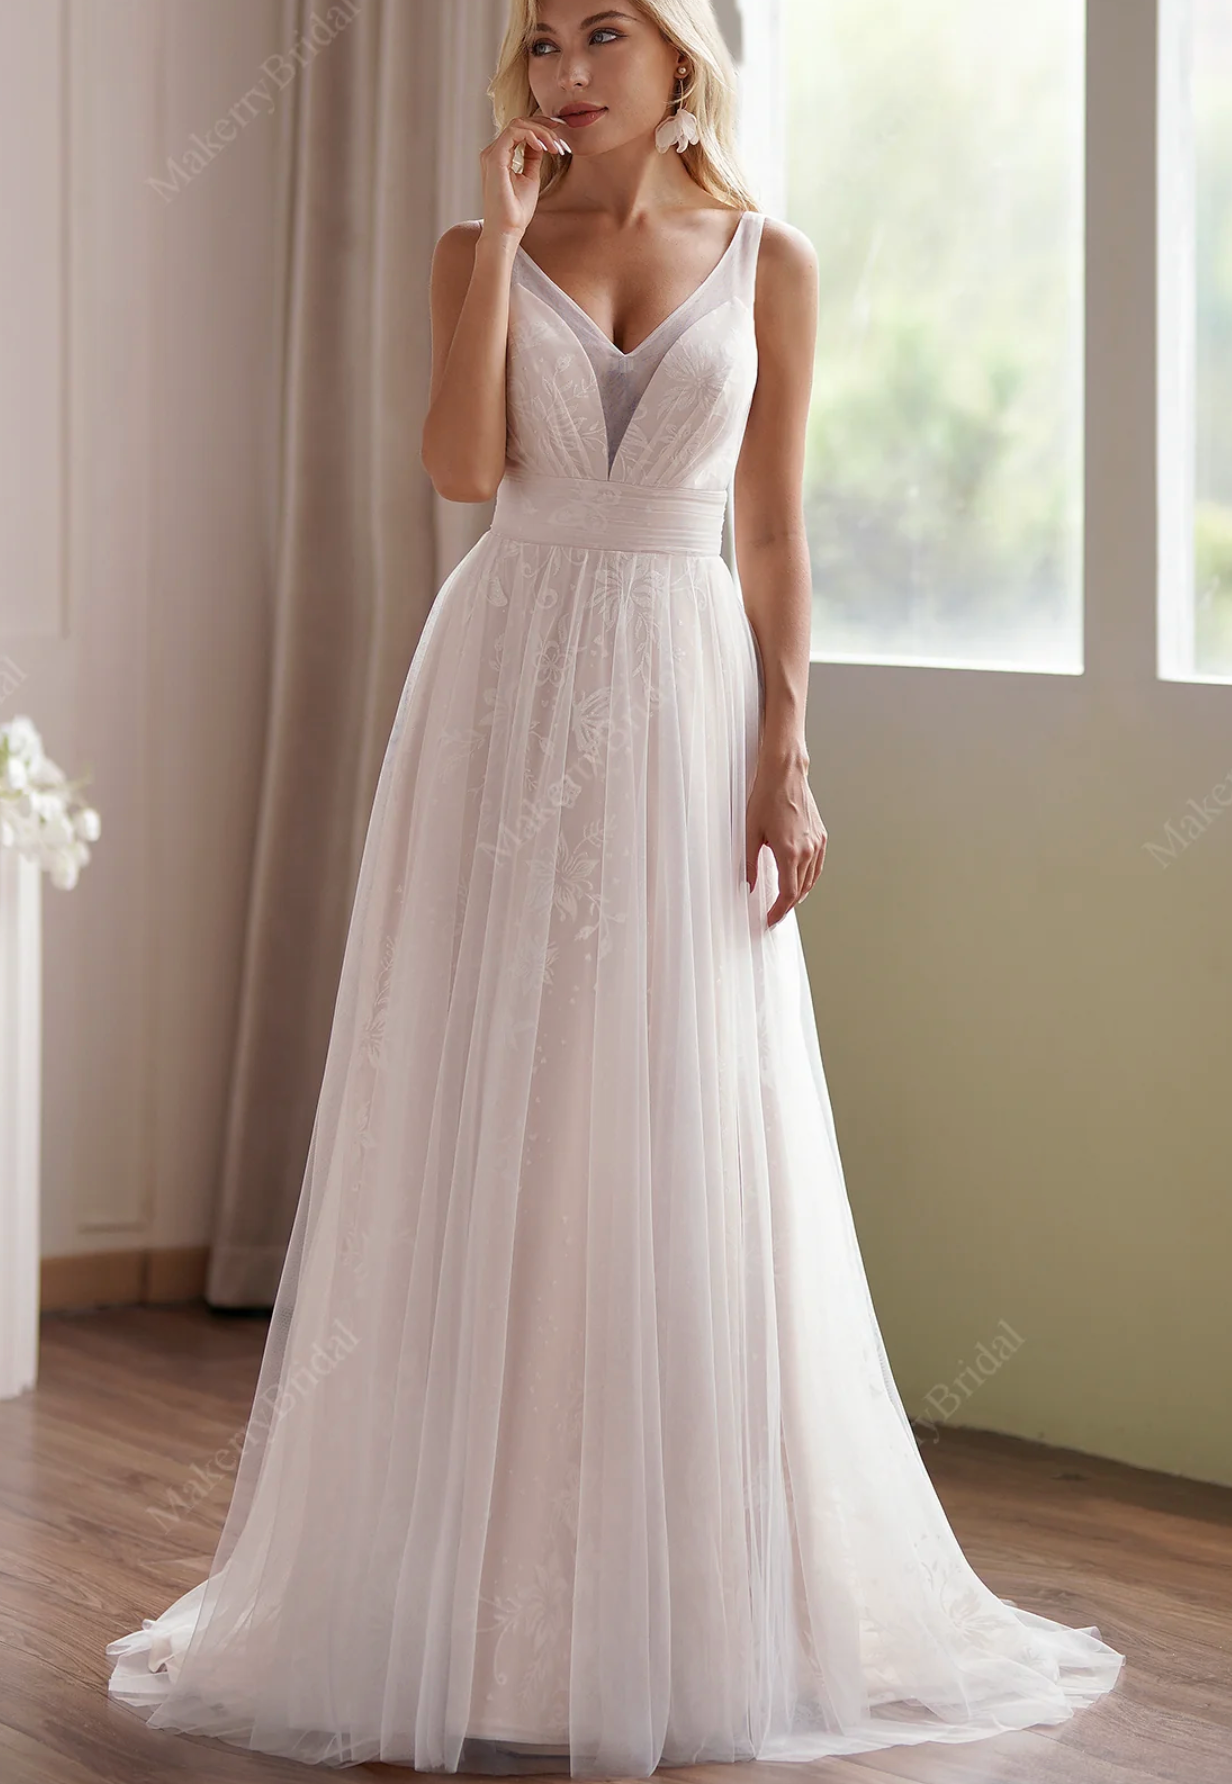 Soft Tulle A-Line Wedding Dress Illusion Neckline And Sheer Back – TulleLux  Bridal Crowns & Accessories